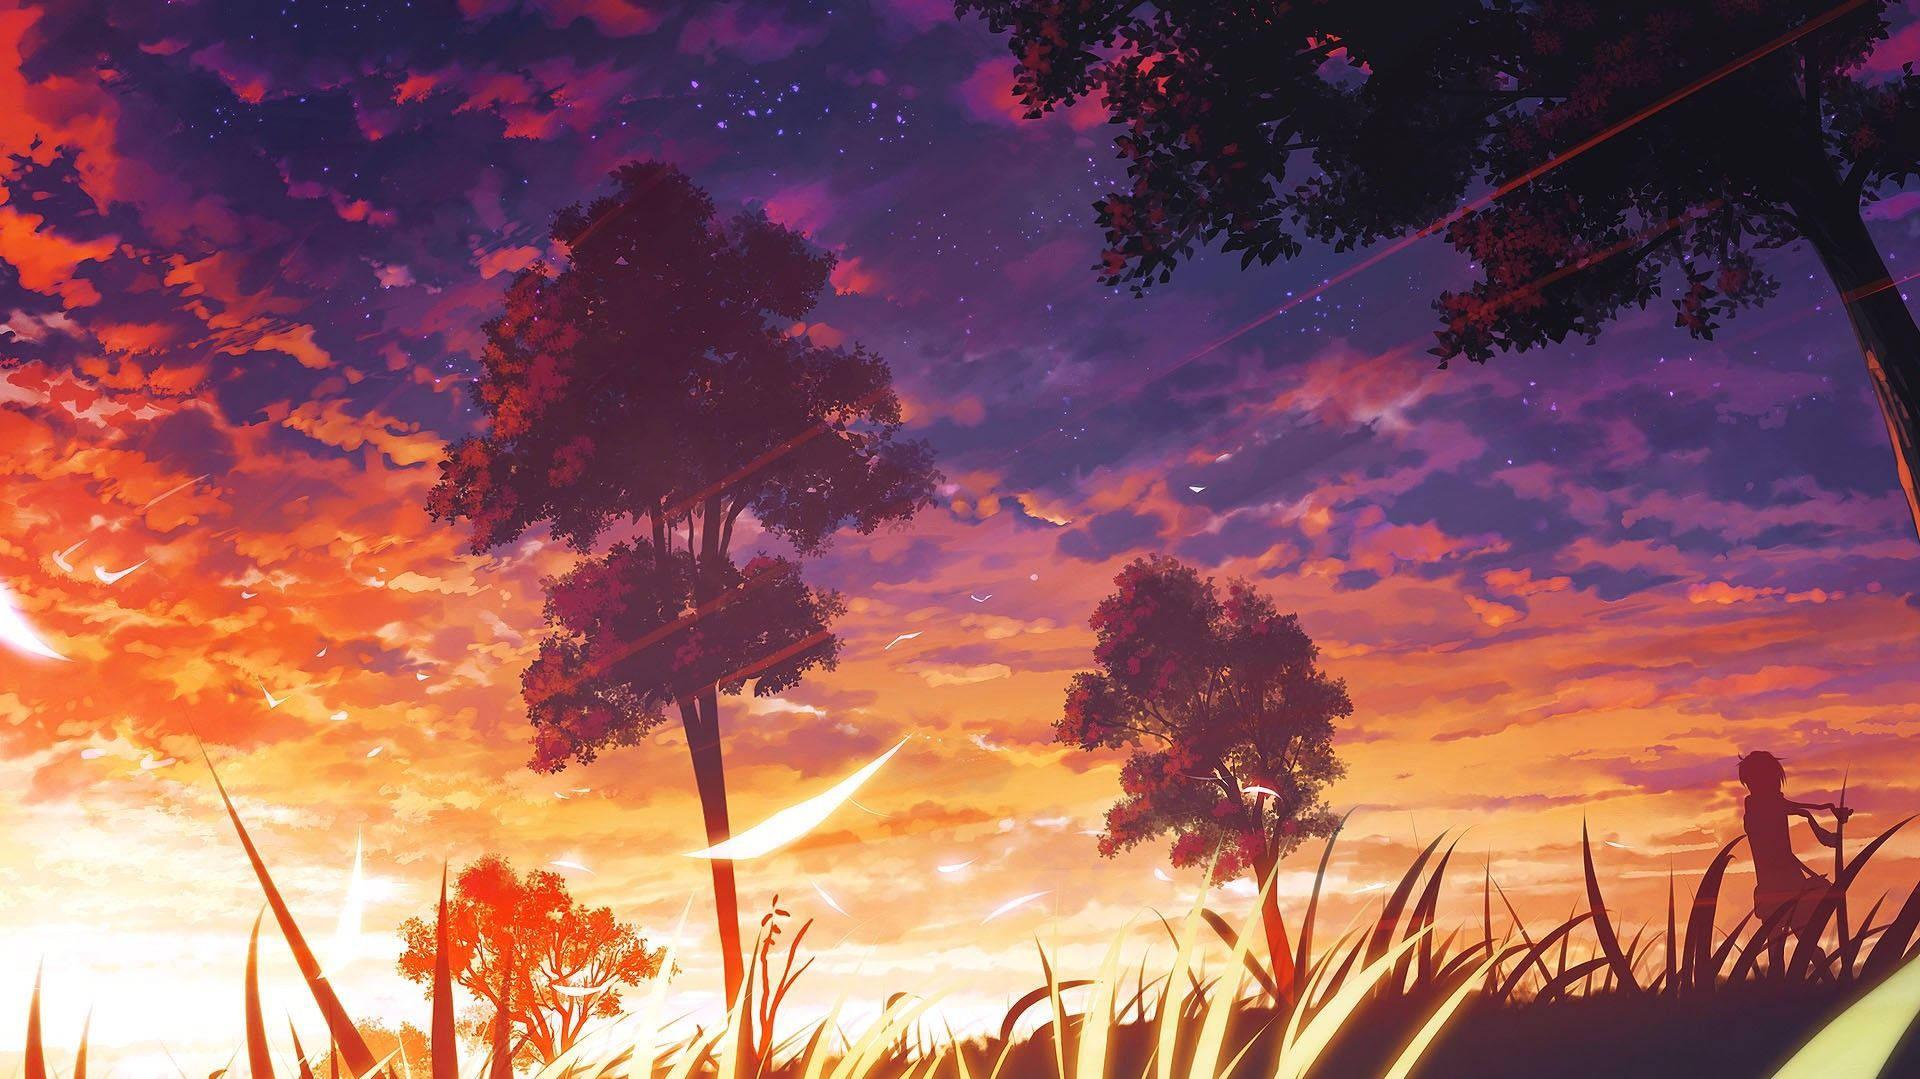 Anime Landscape Phone Wallpaper by そよ風 - Mobile Abyss